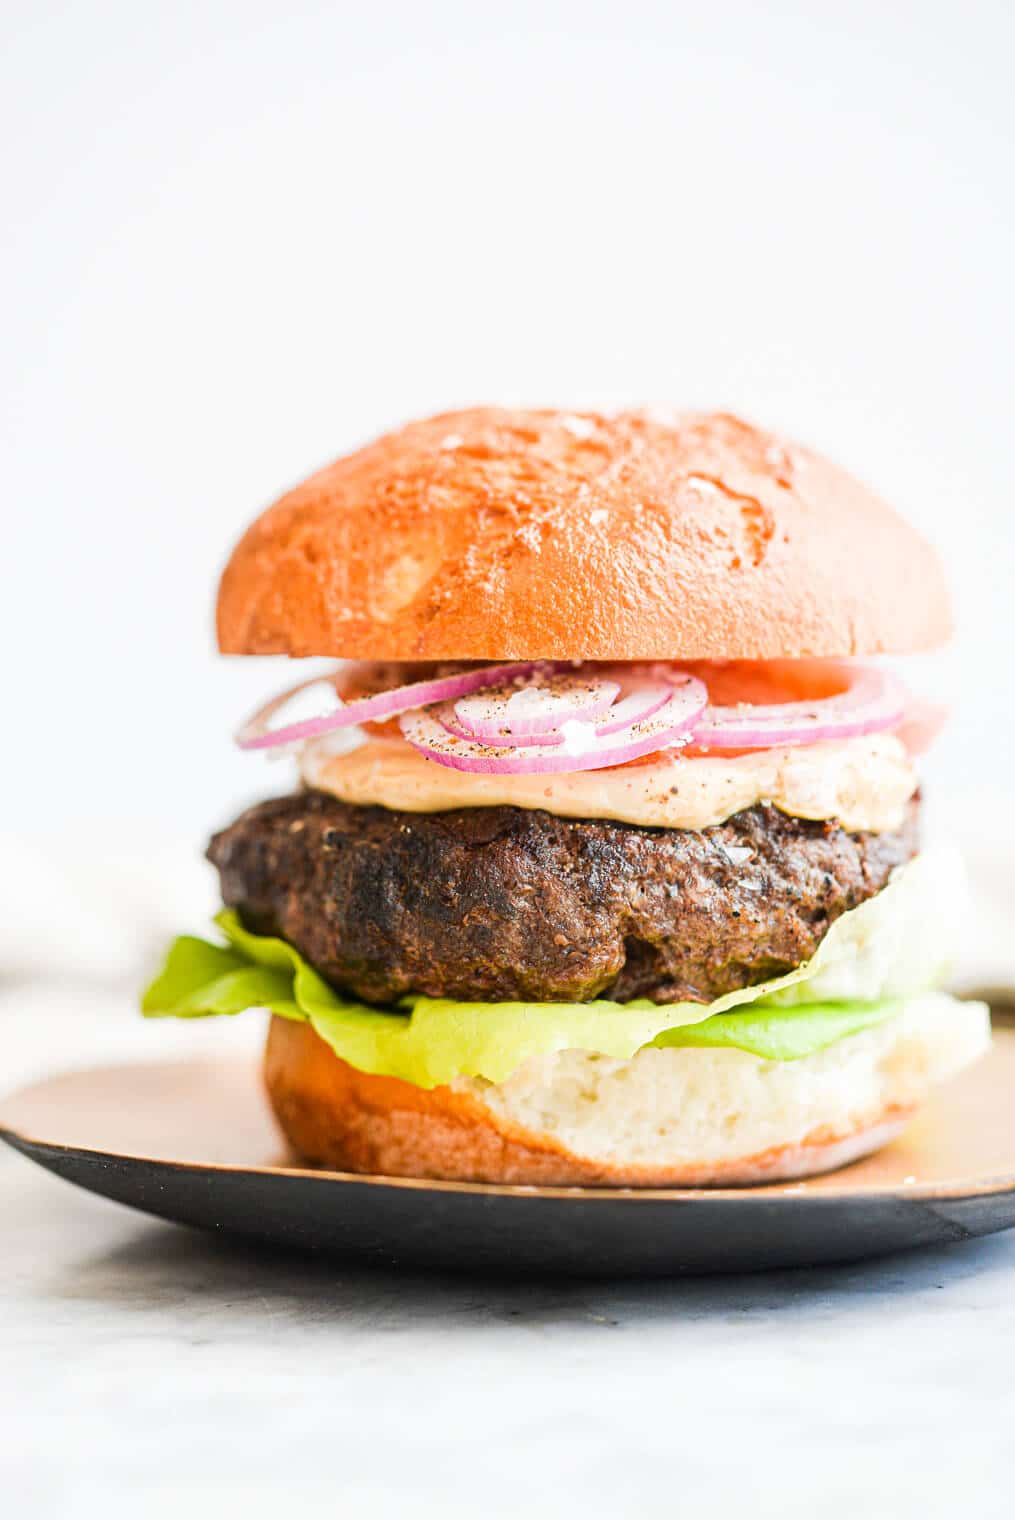 a beef burger on a bun topped with lettuce, tomato, red onion, and chipotle mayo